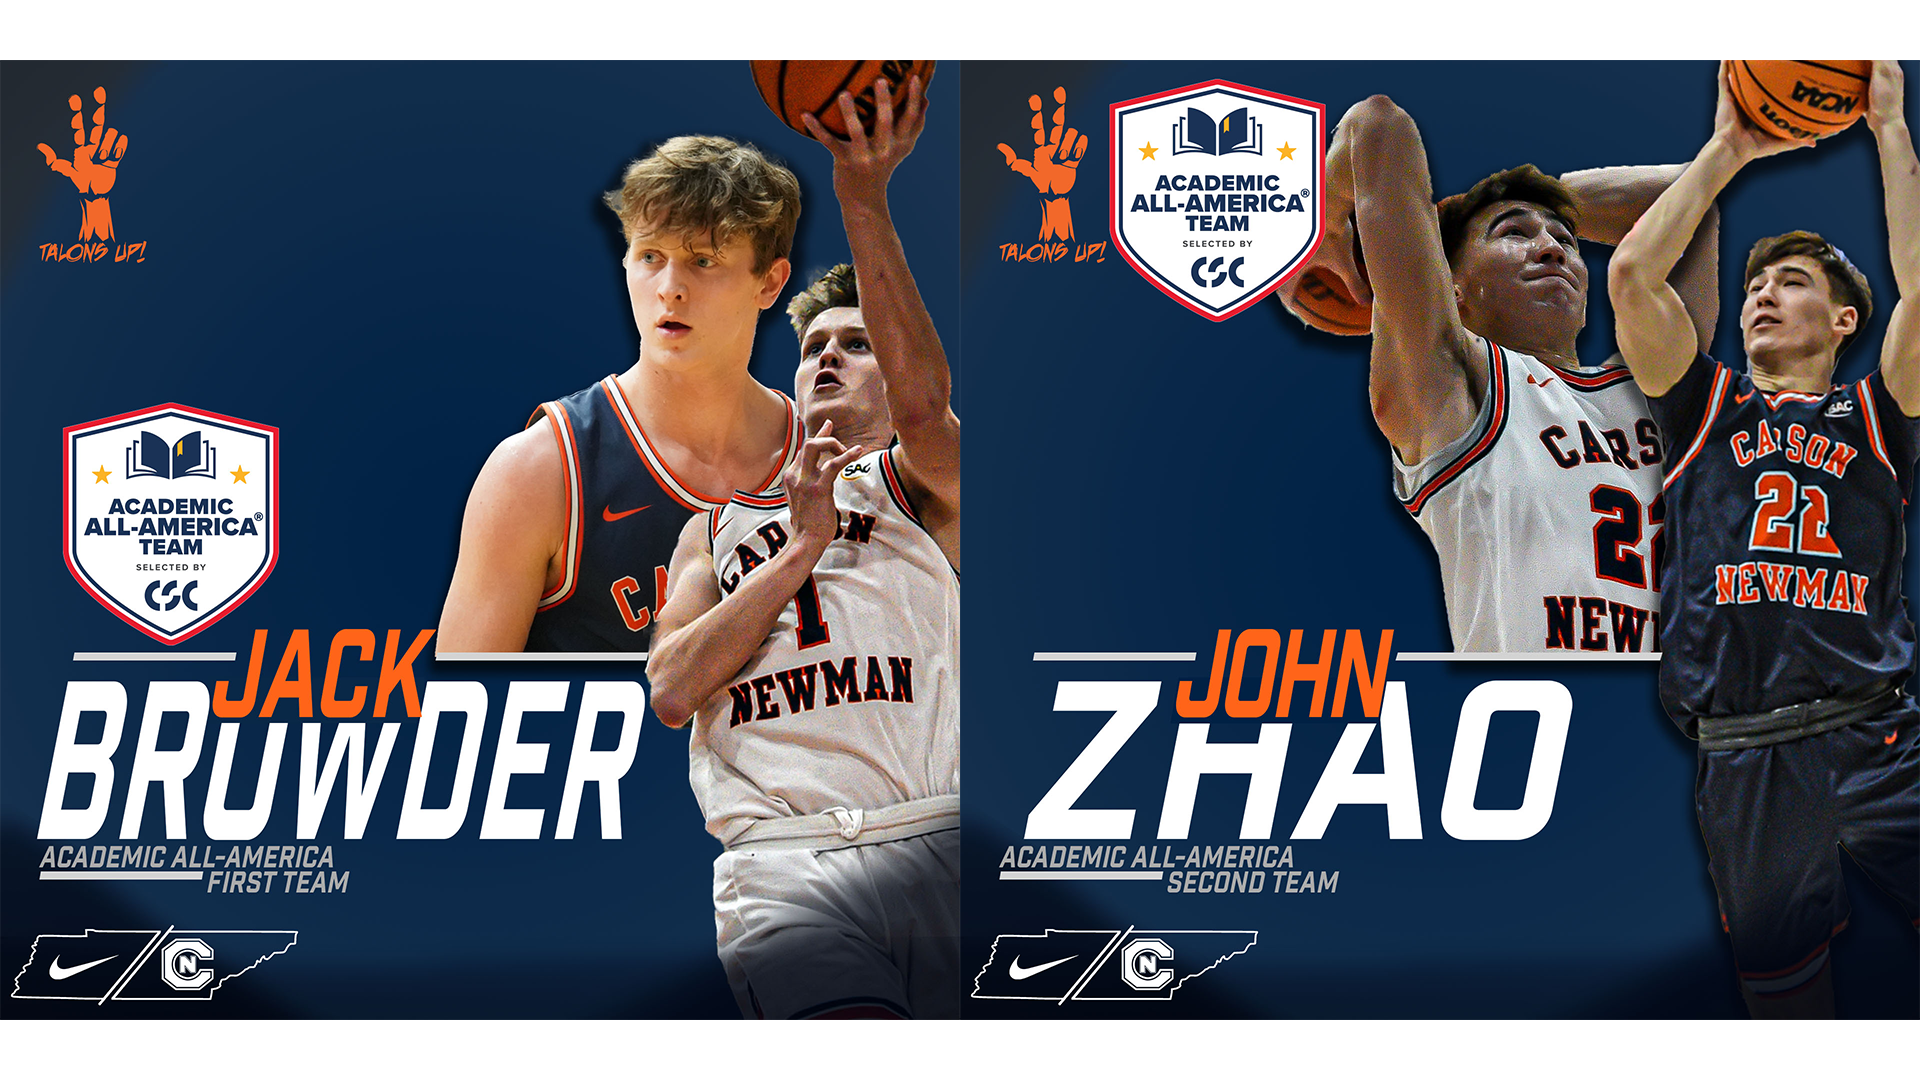 Browder, Zhao named CSC Academic All-Americans